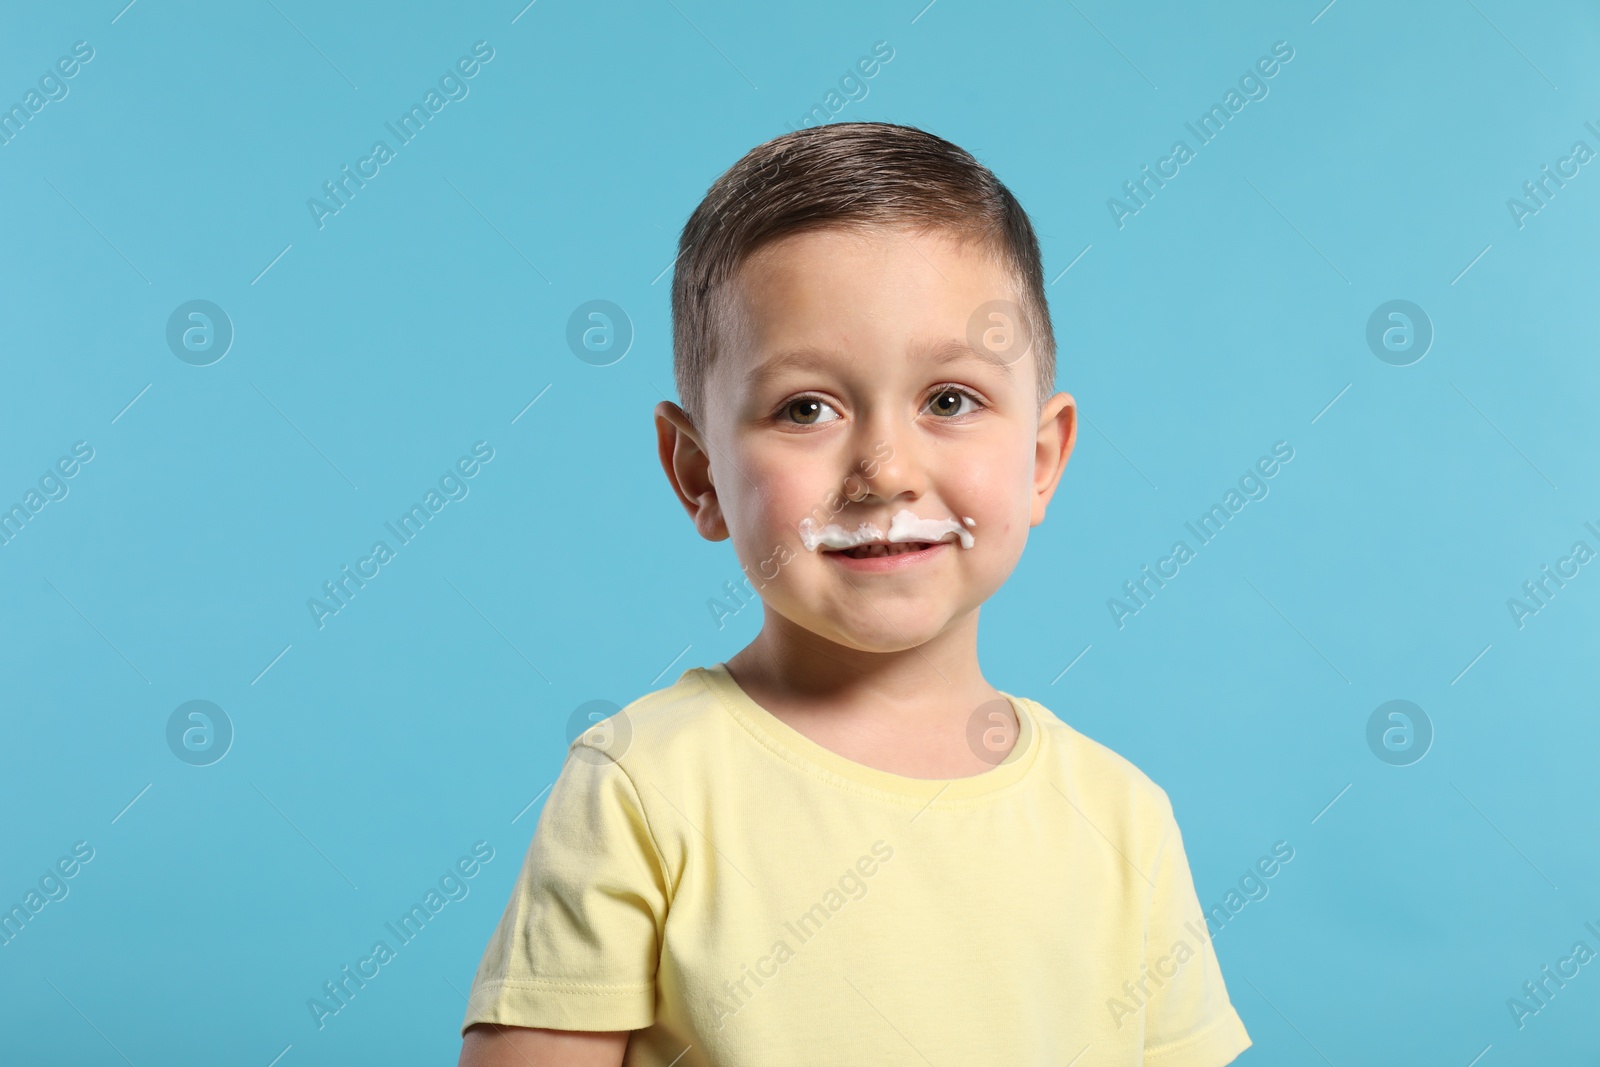 Photo of Cute boy with milk mustache on light blue background